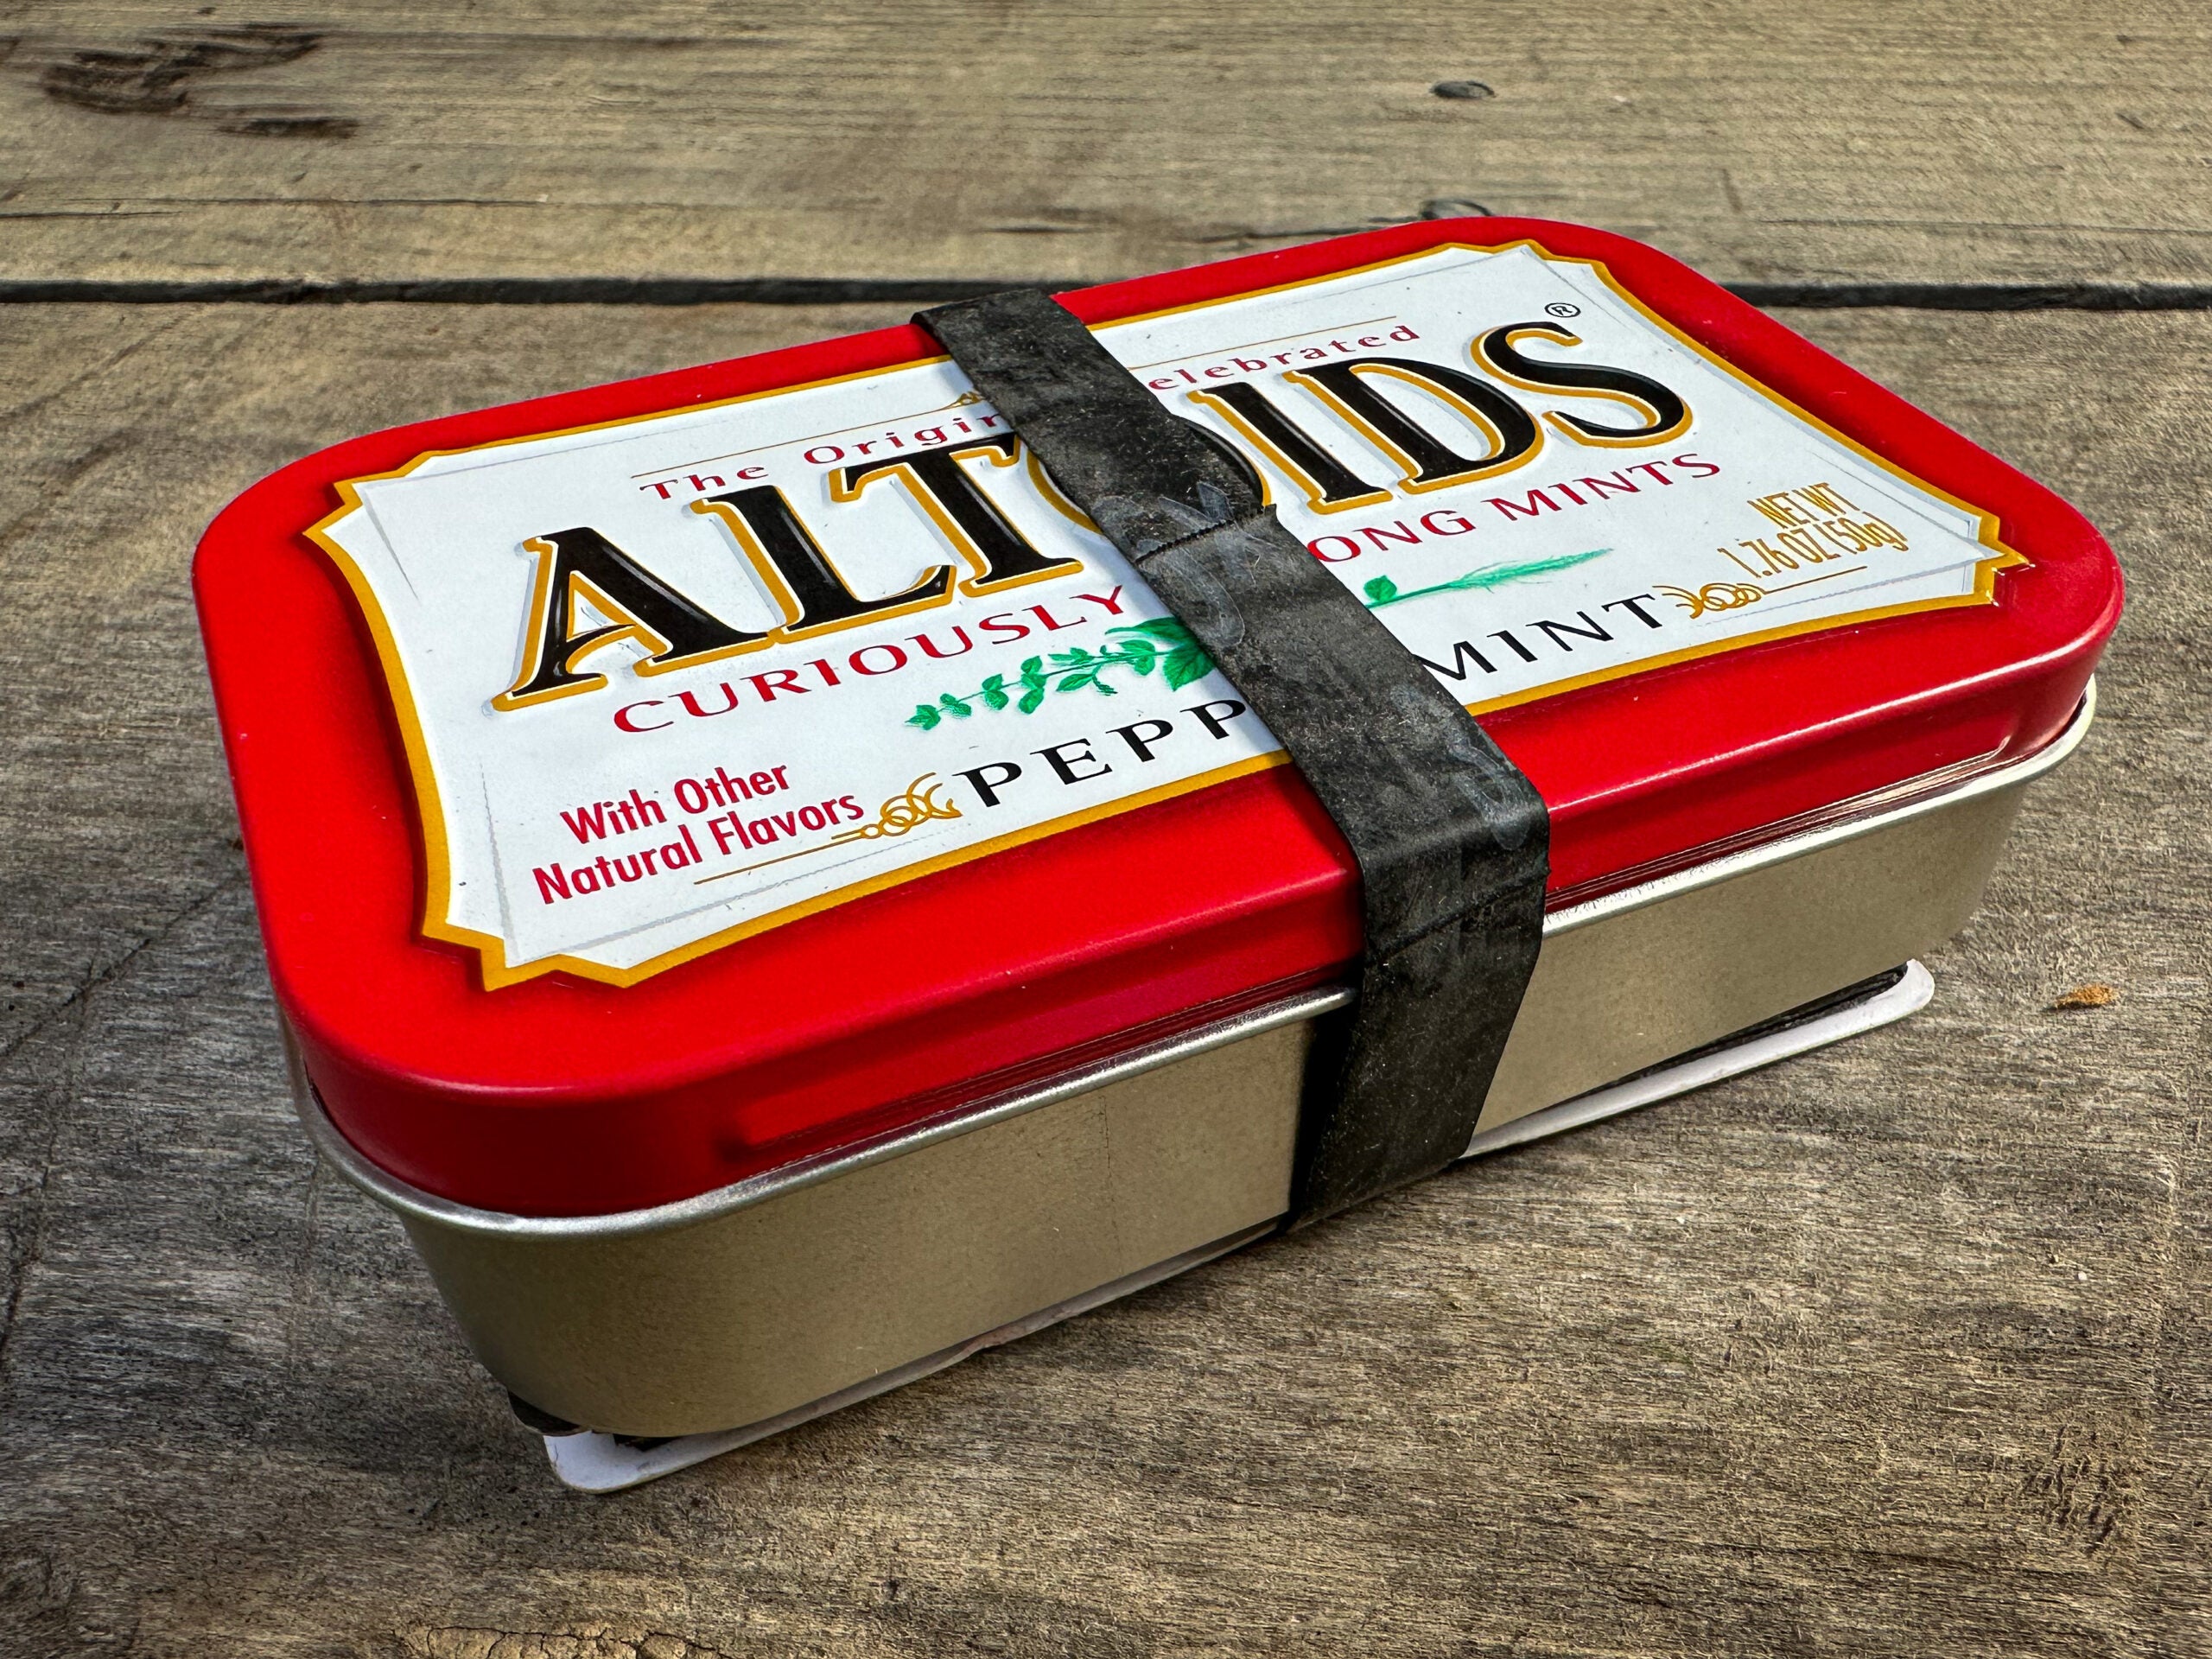 Rubber band is secured around an Altoids tin.